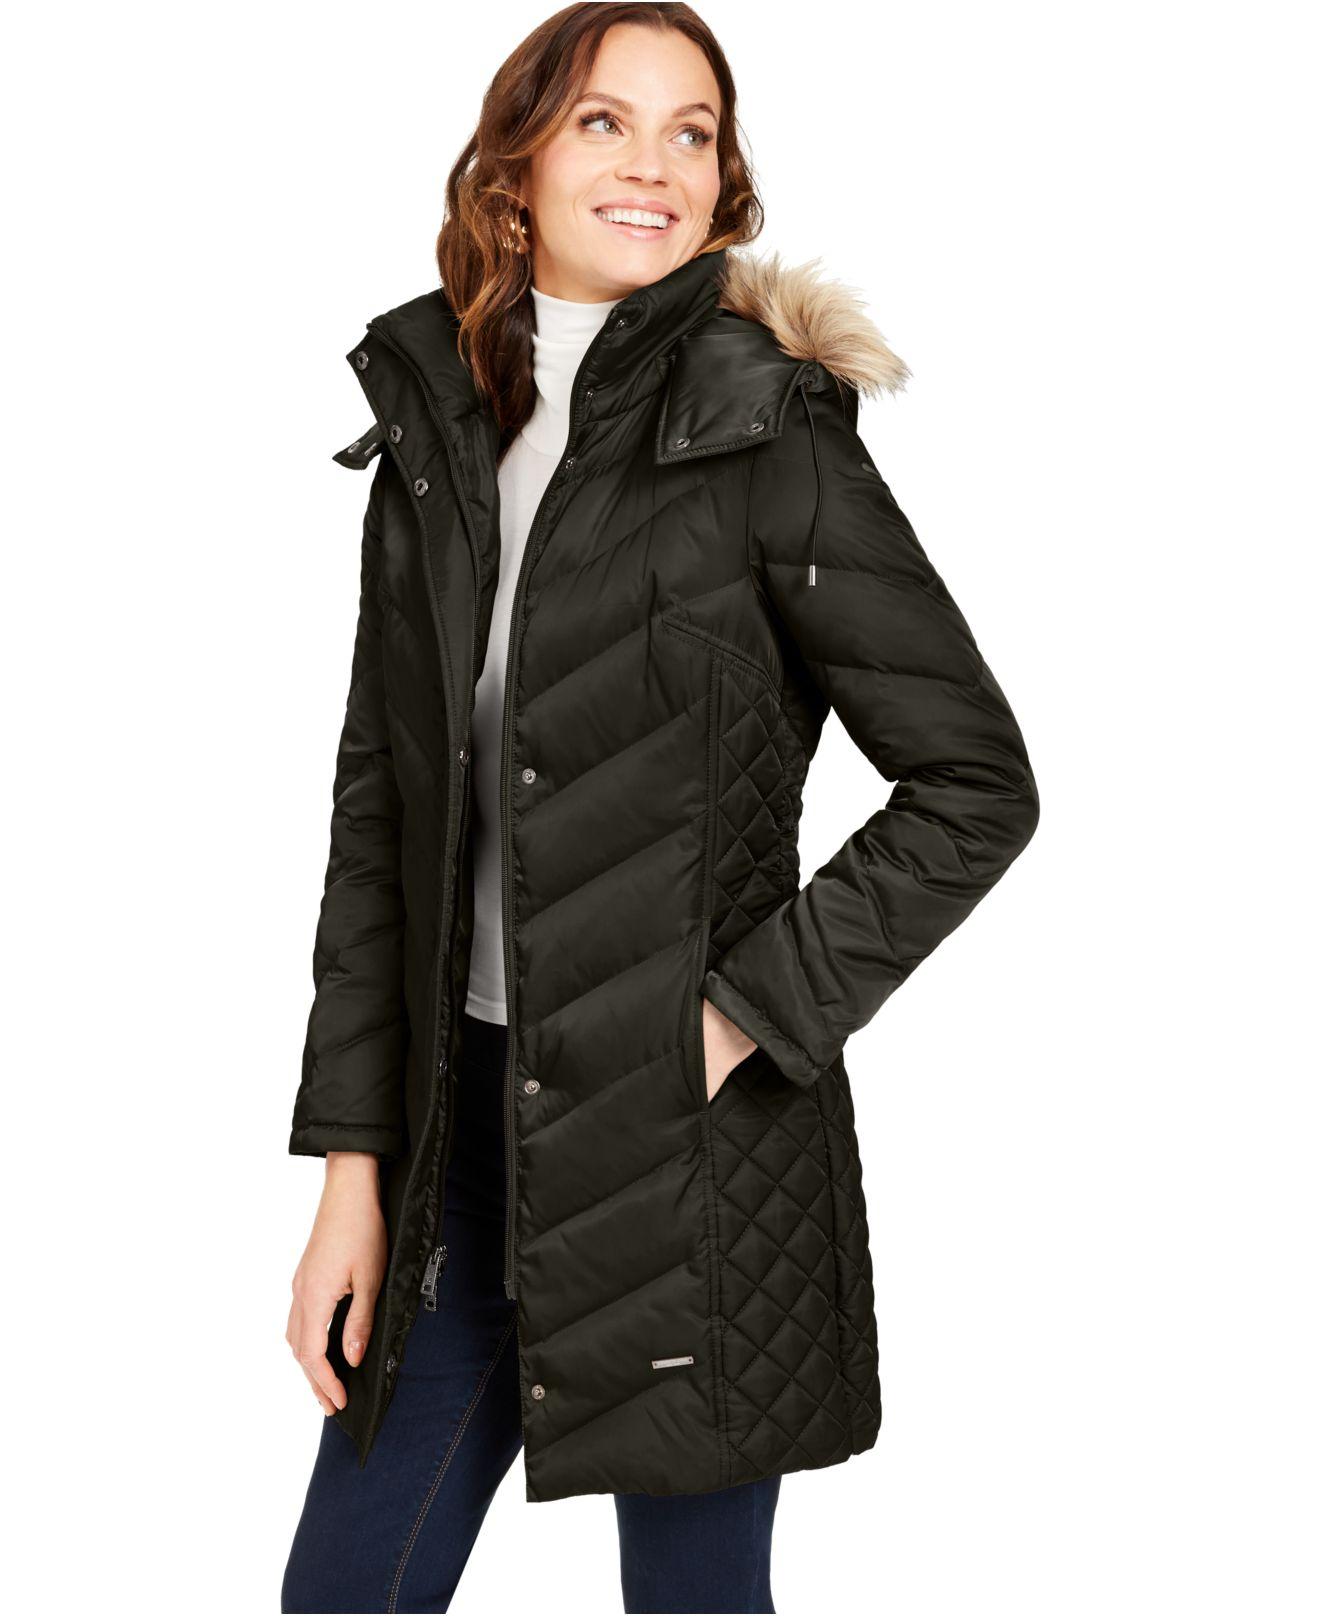 Kenneth Cole Faux-fur-trim Hooded Down Puffer Coat in Olive (Green) - Lyst